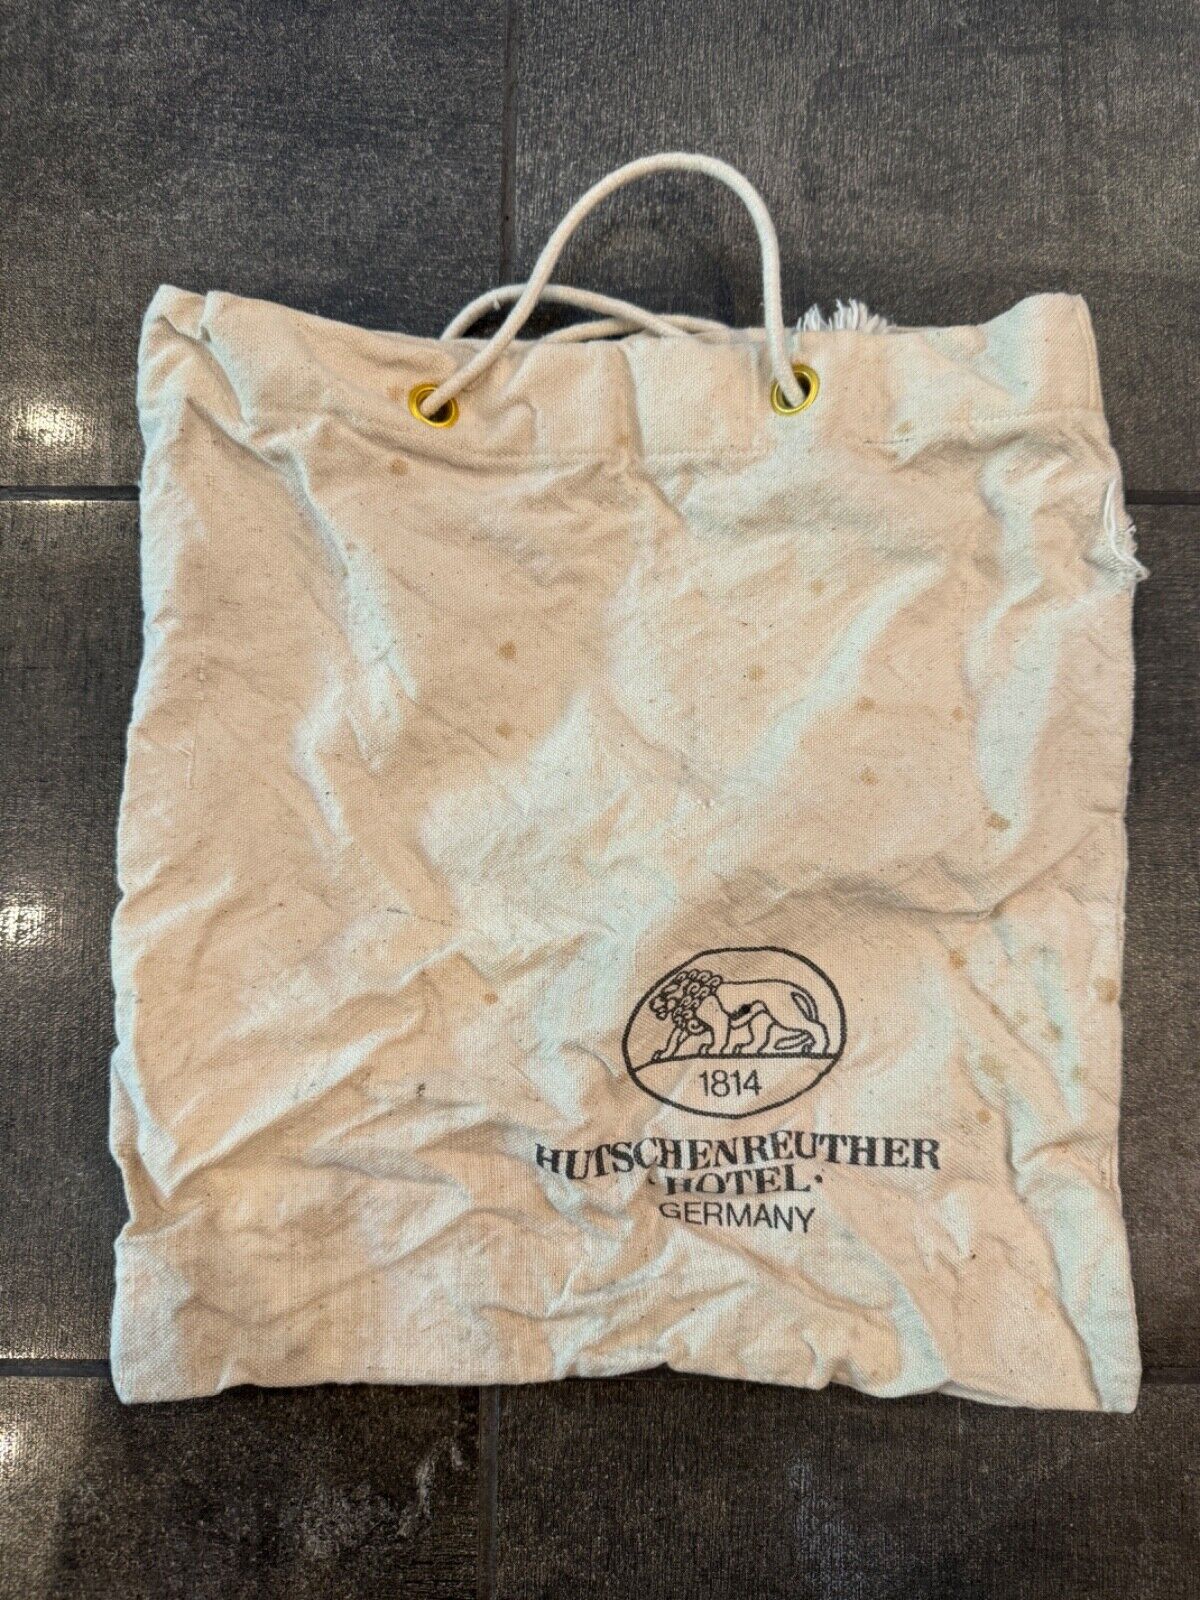 1814 HOTEL HUTSCHENREUTHER Germany REUSABLE SHOPPING BAG , TOTE